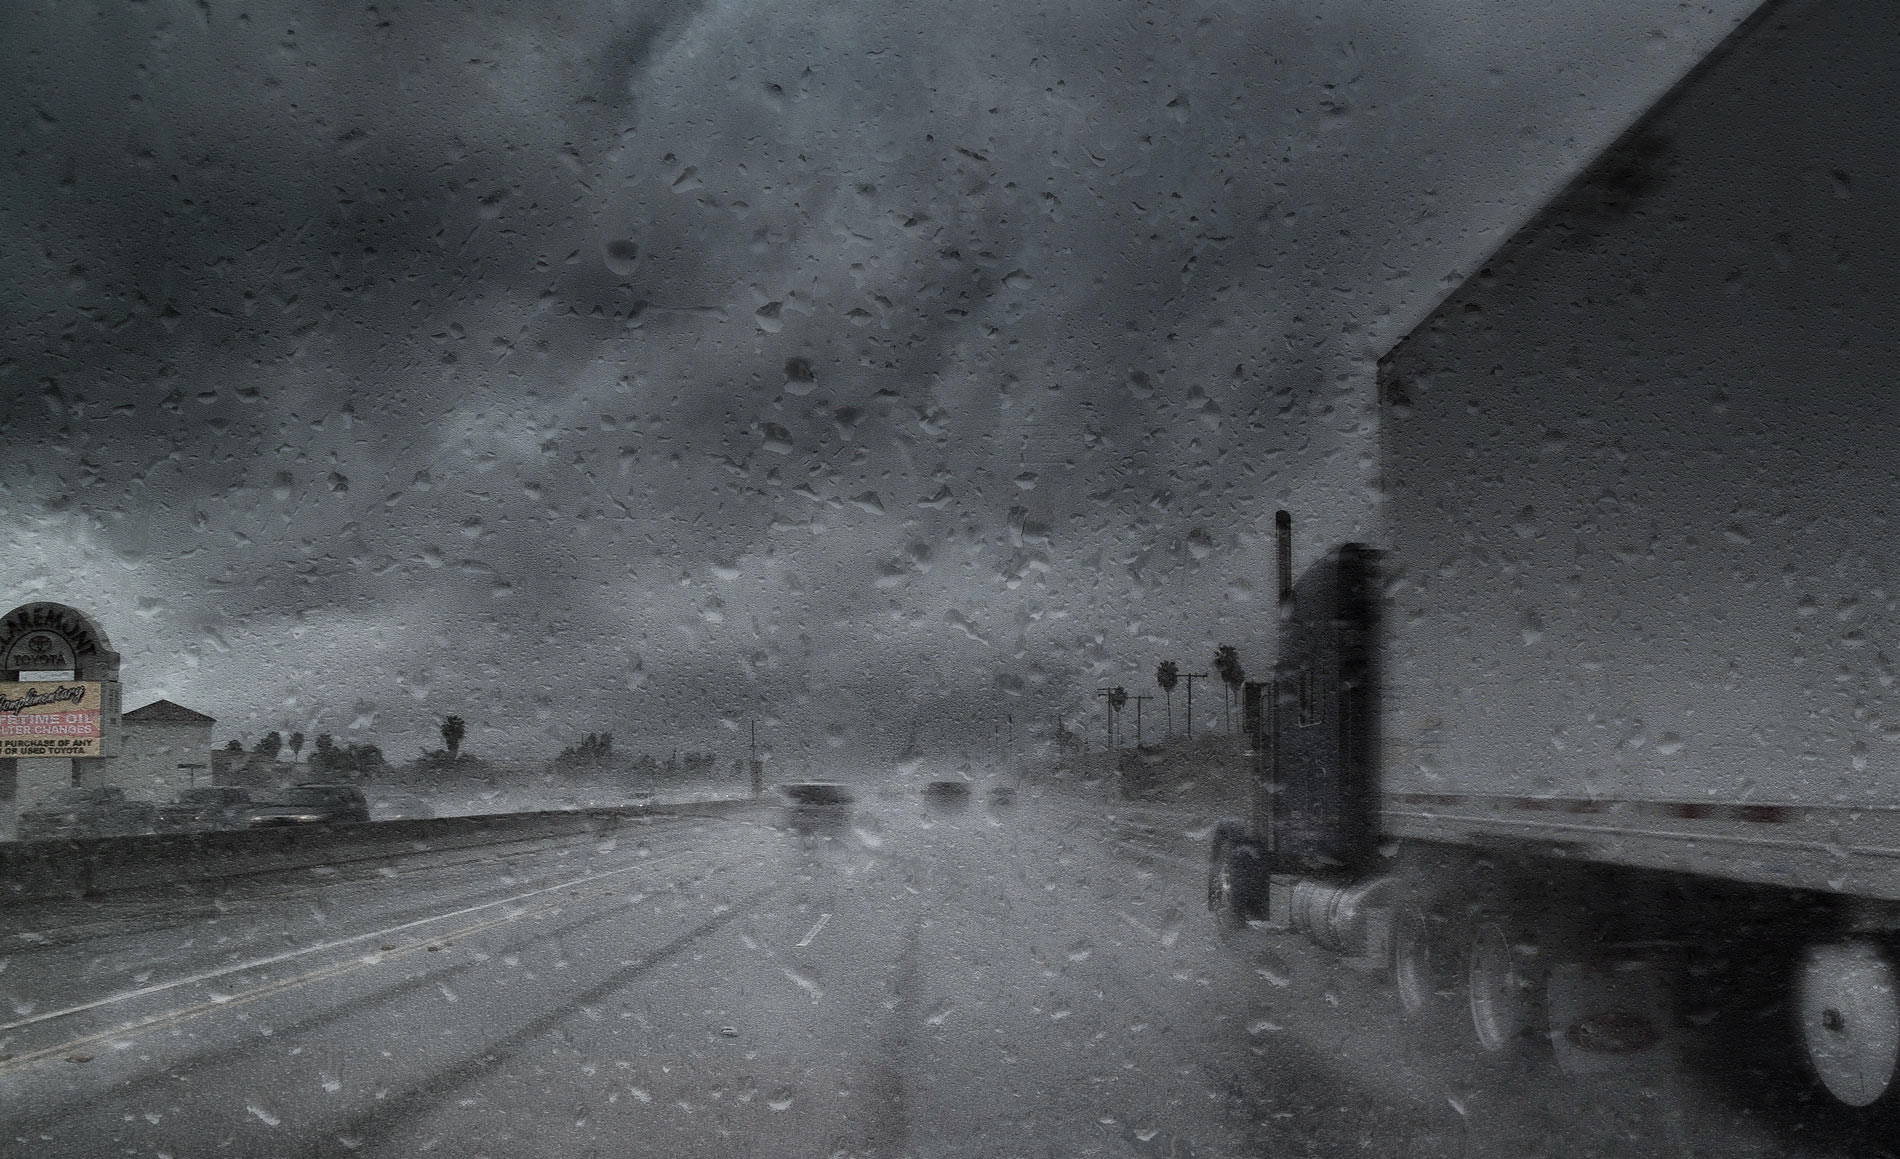 Rainy day on the 10 Freeway in Los Angeles, California